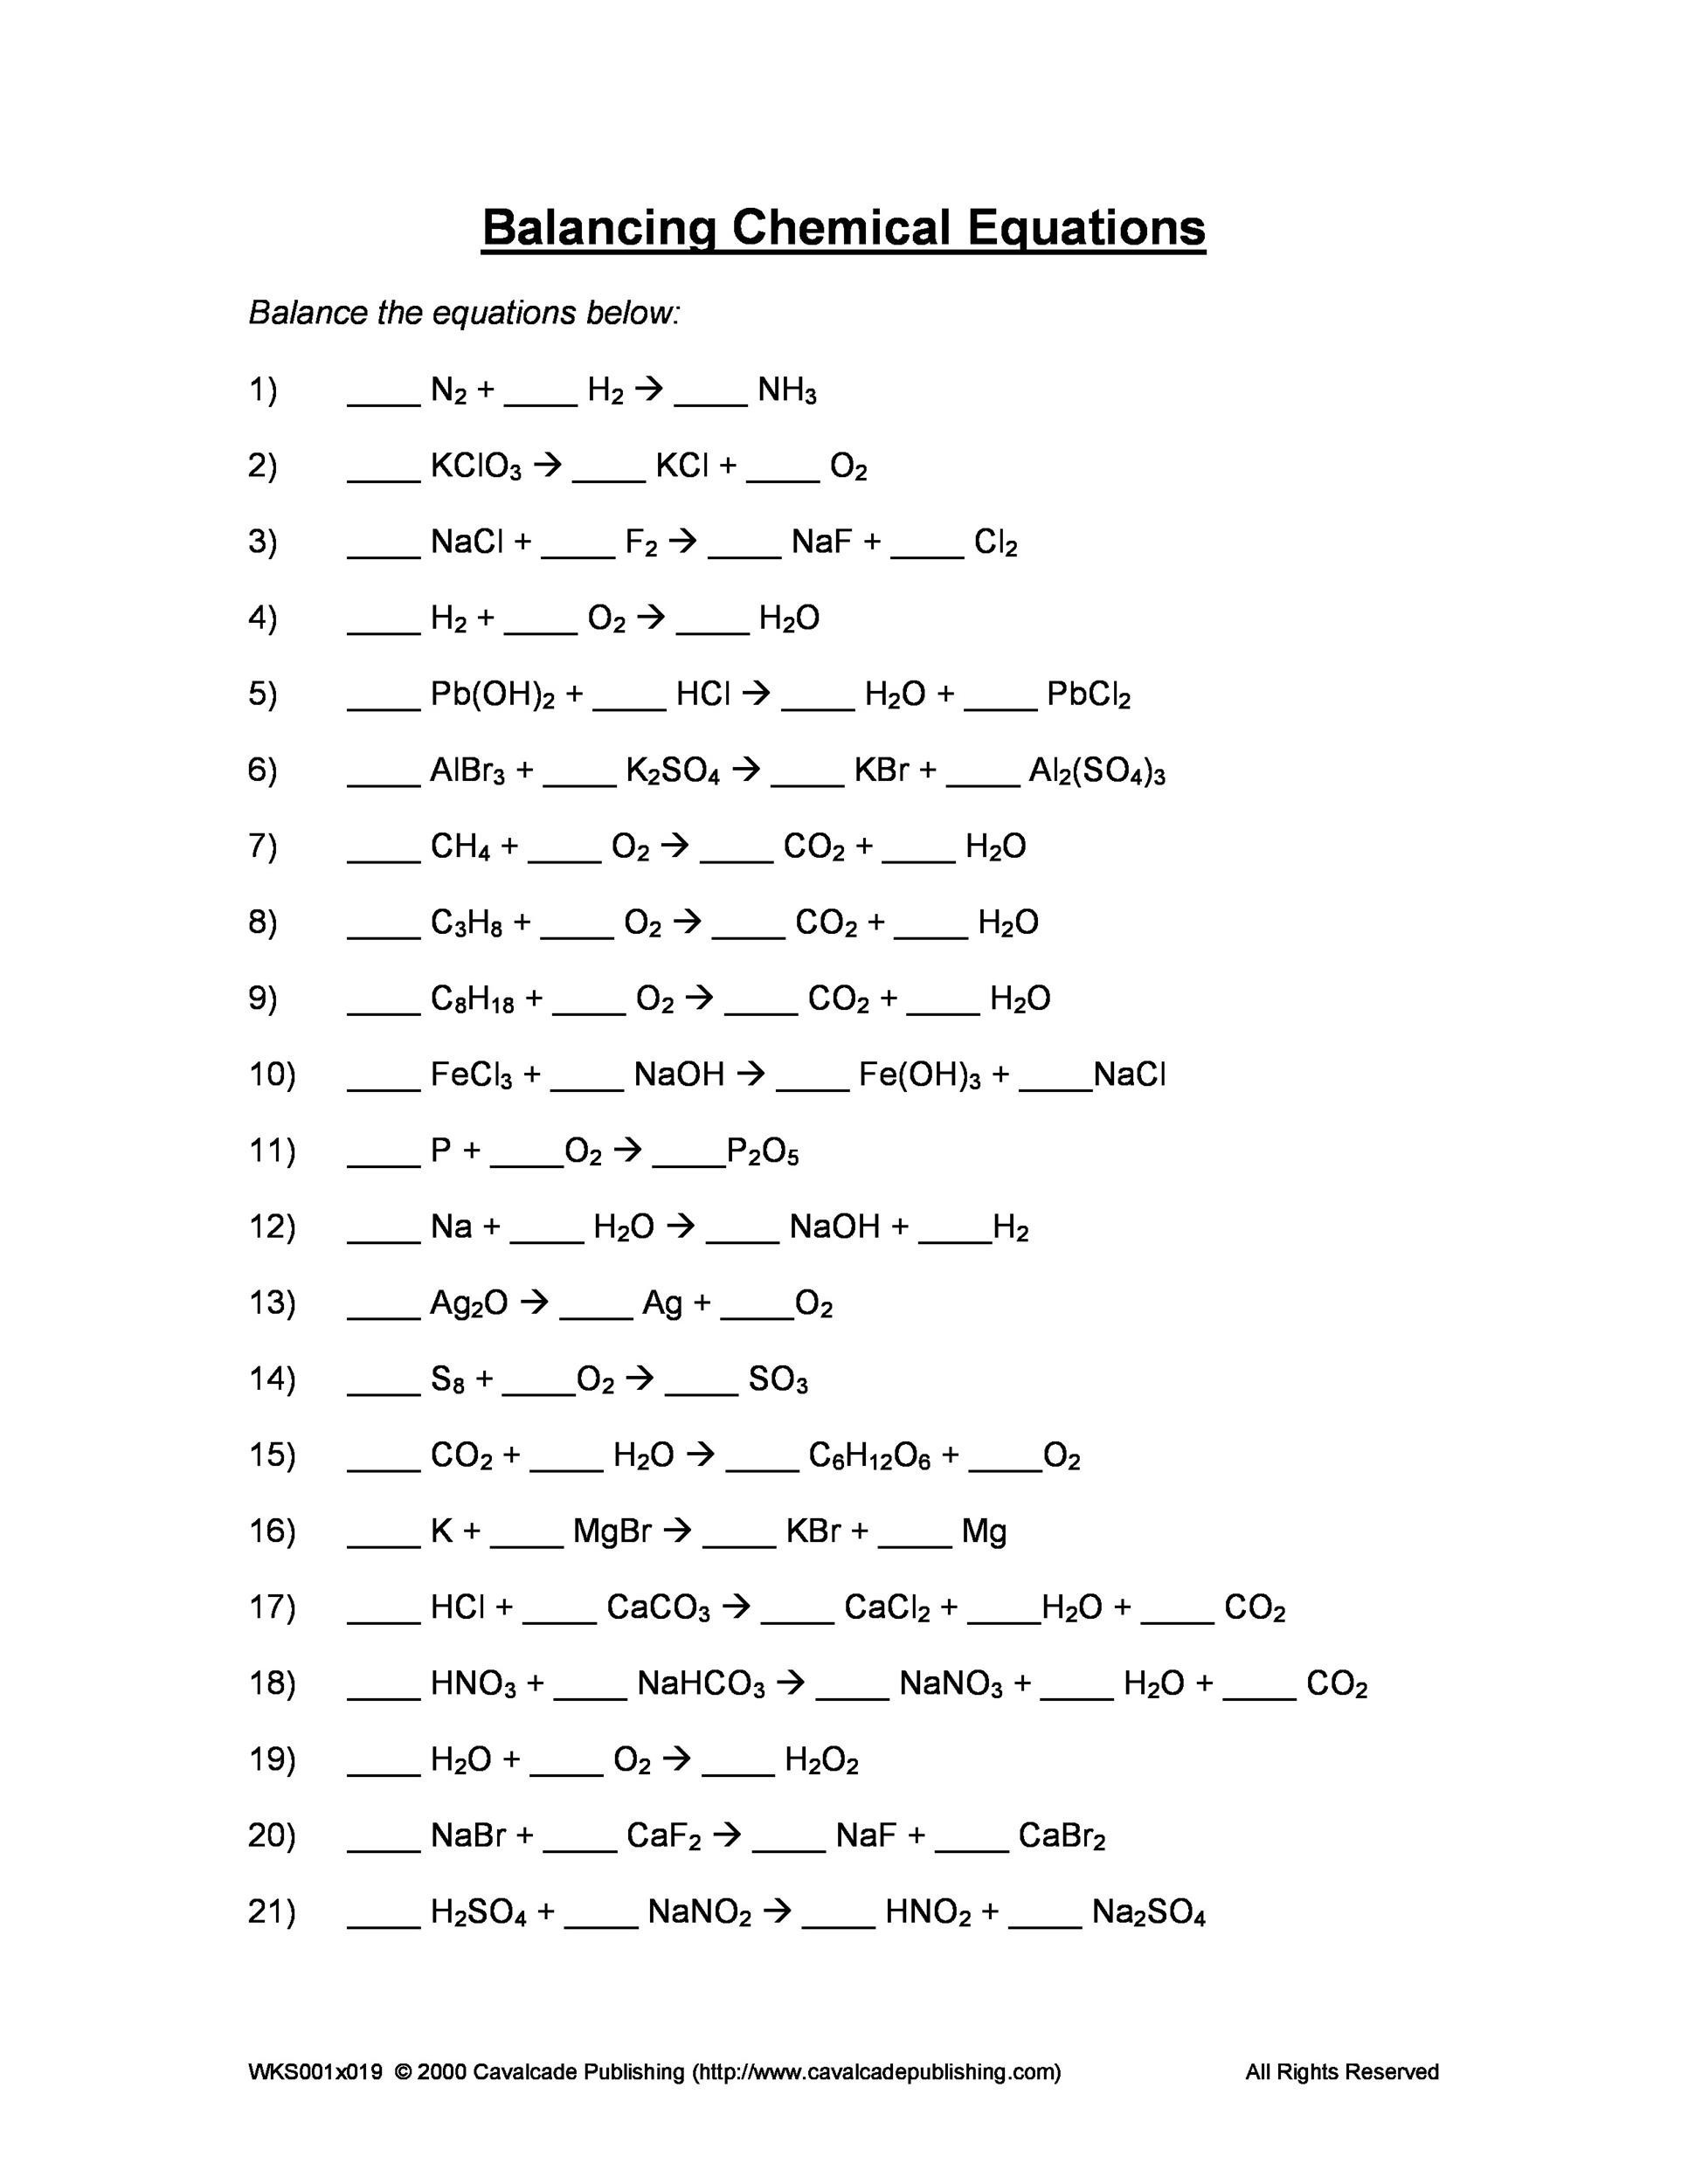 Online homework help for balanced equations: Homework Help Inside Balancing Chemical Equations Worksheet Answers